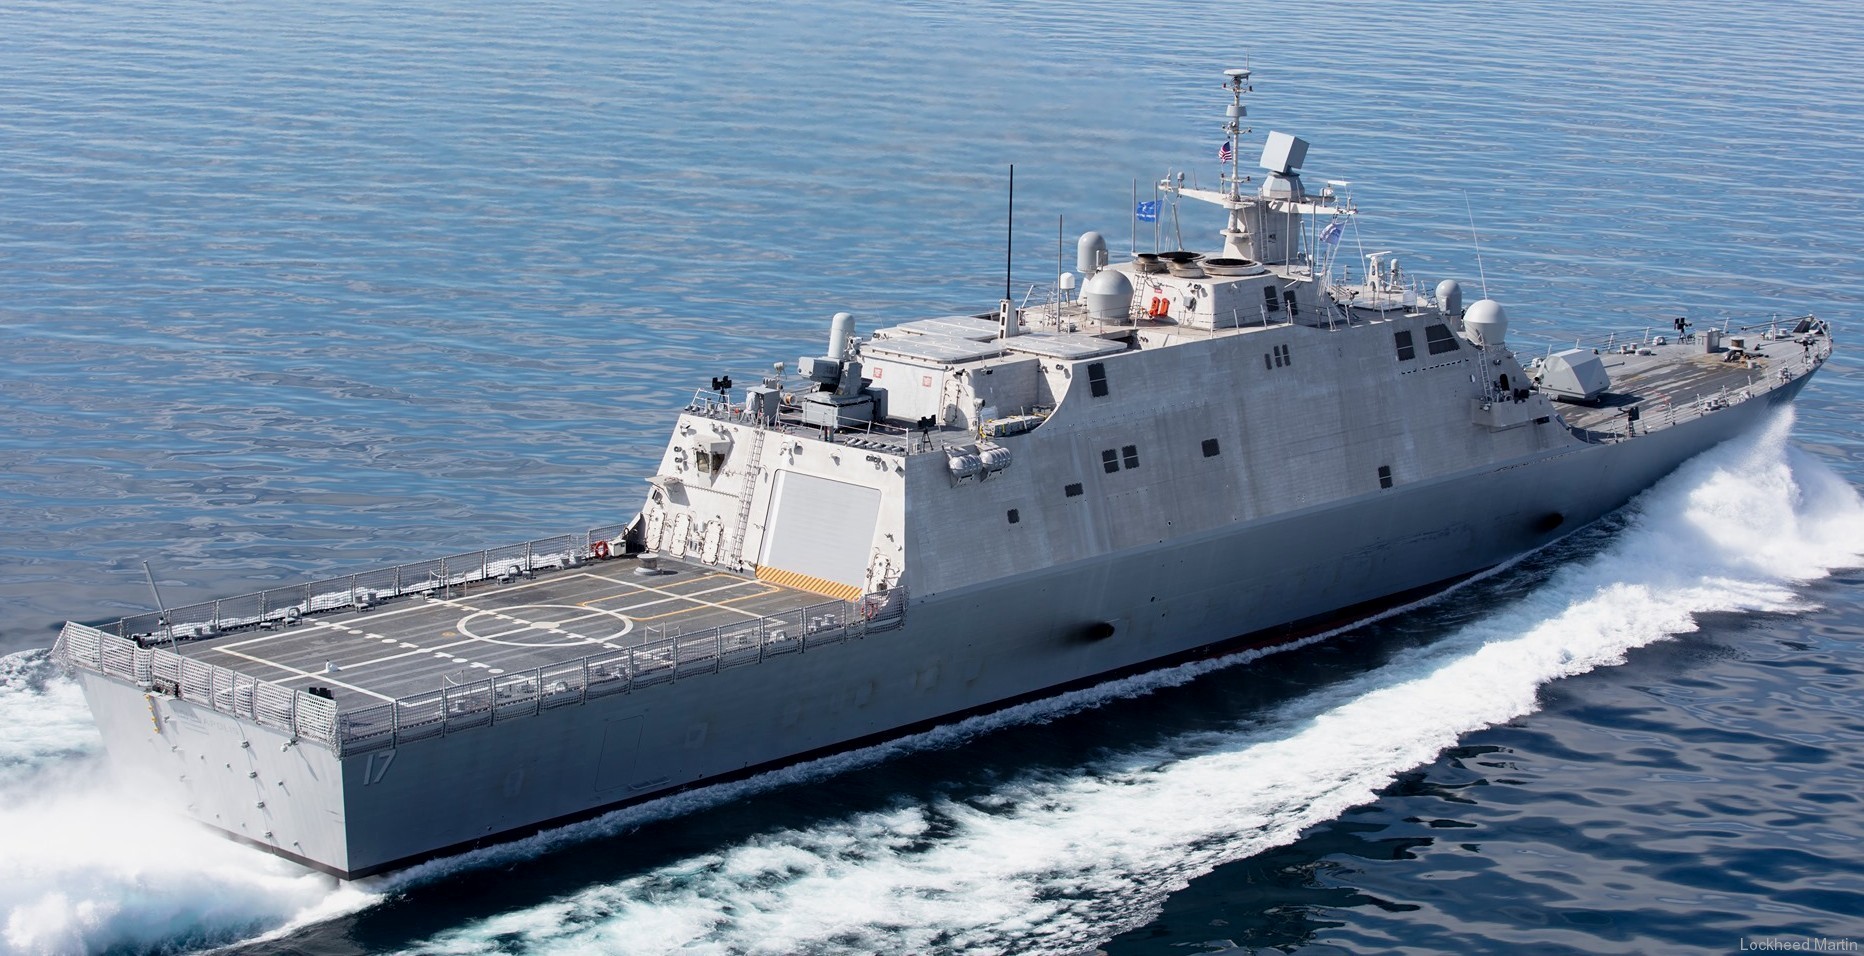 lcs-17 uss indianapolis freedom class littoral combat ship us navy 16